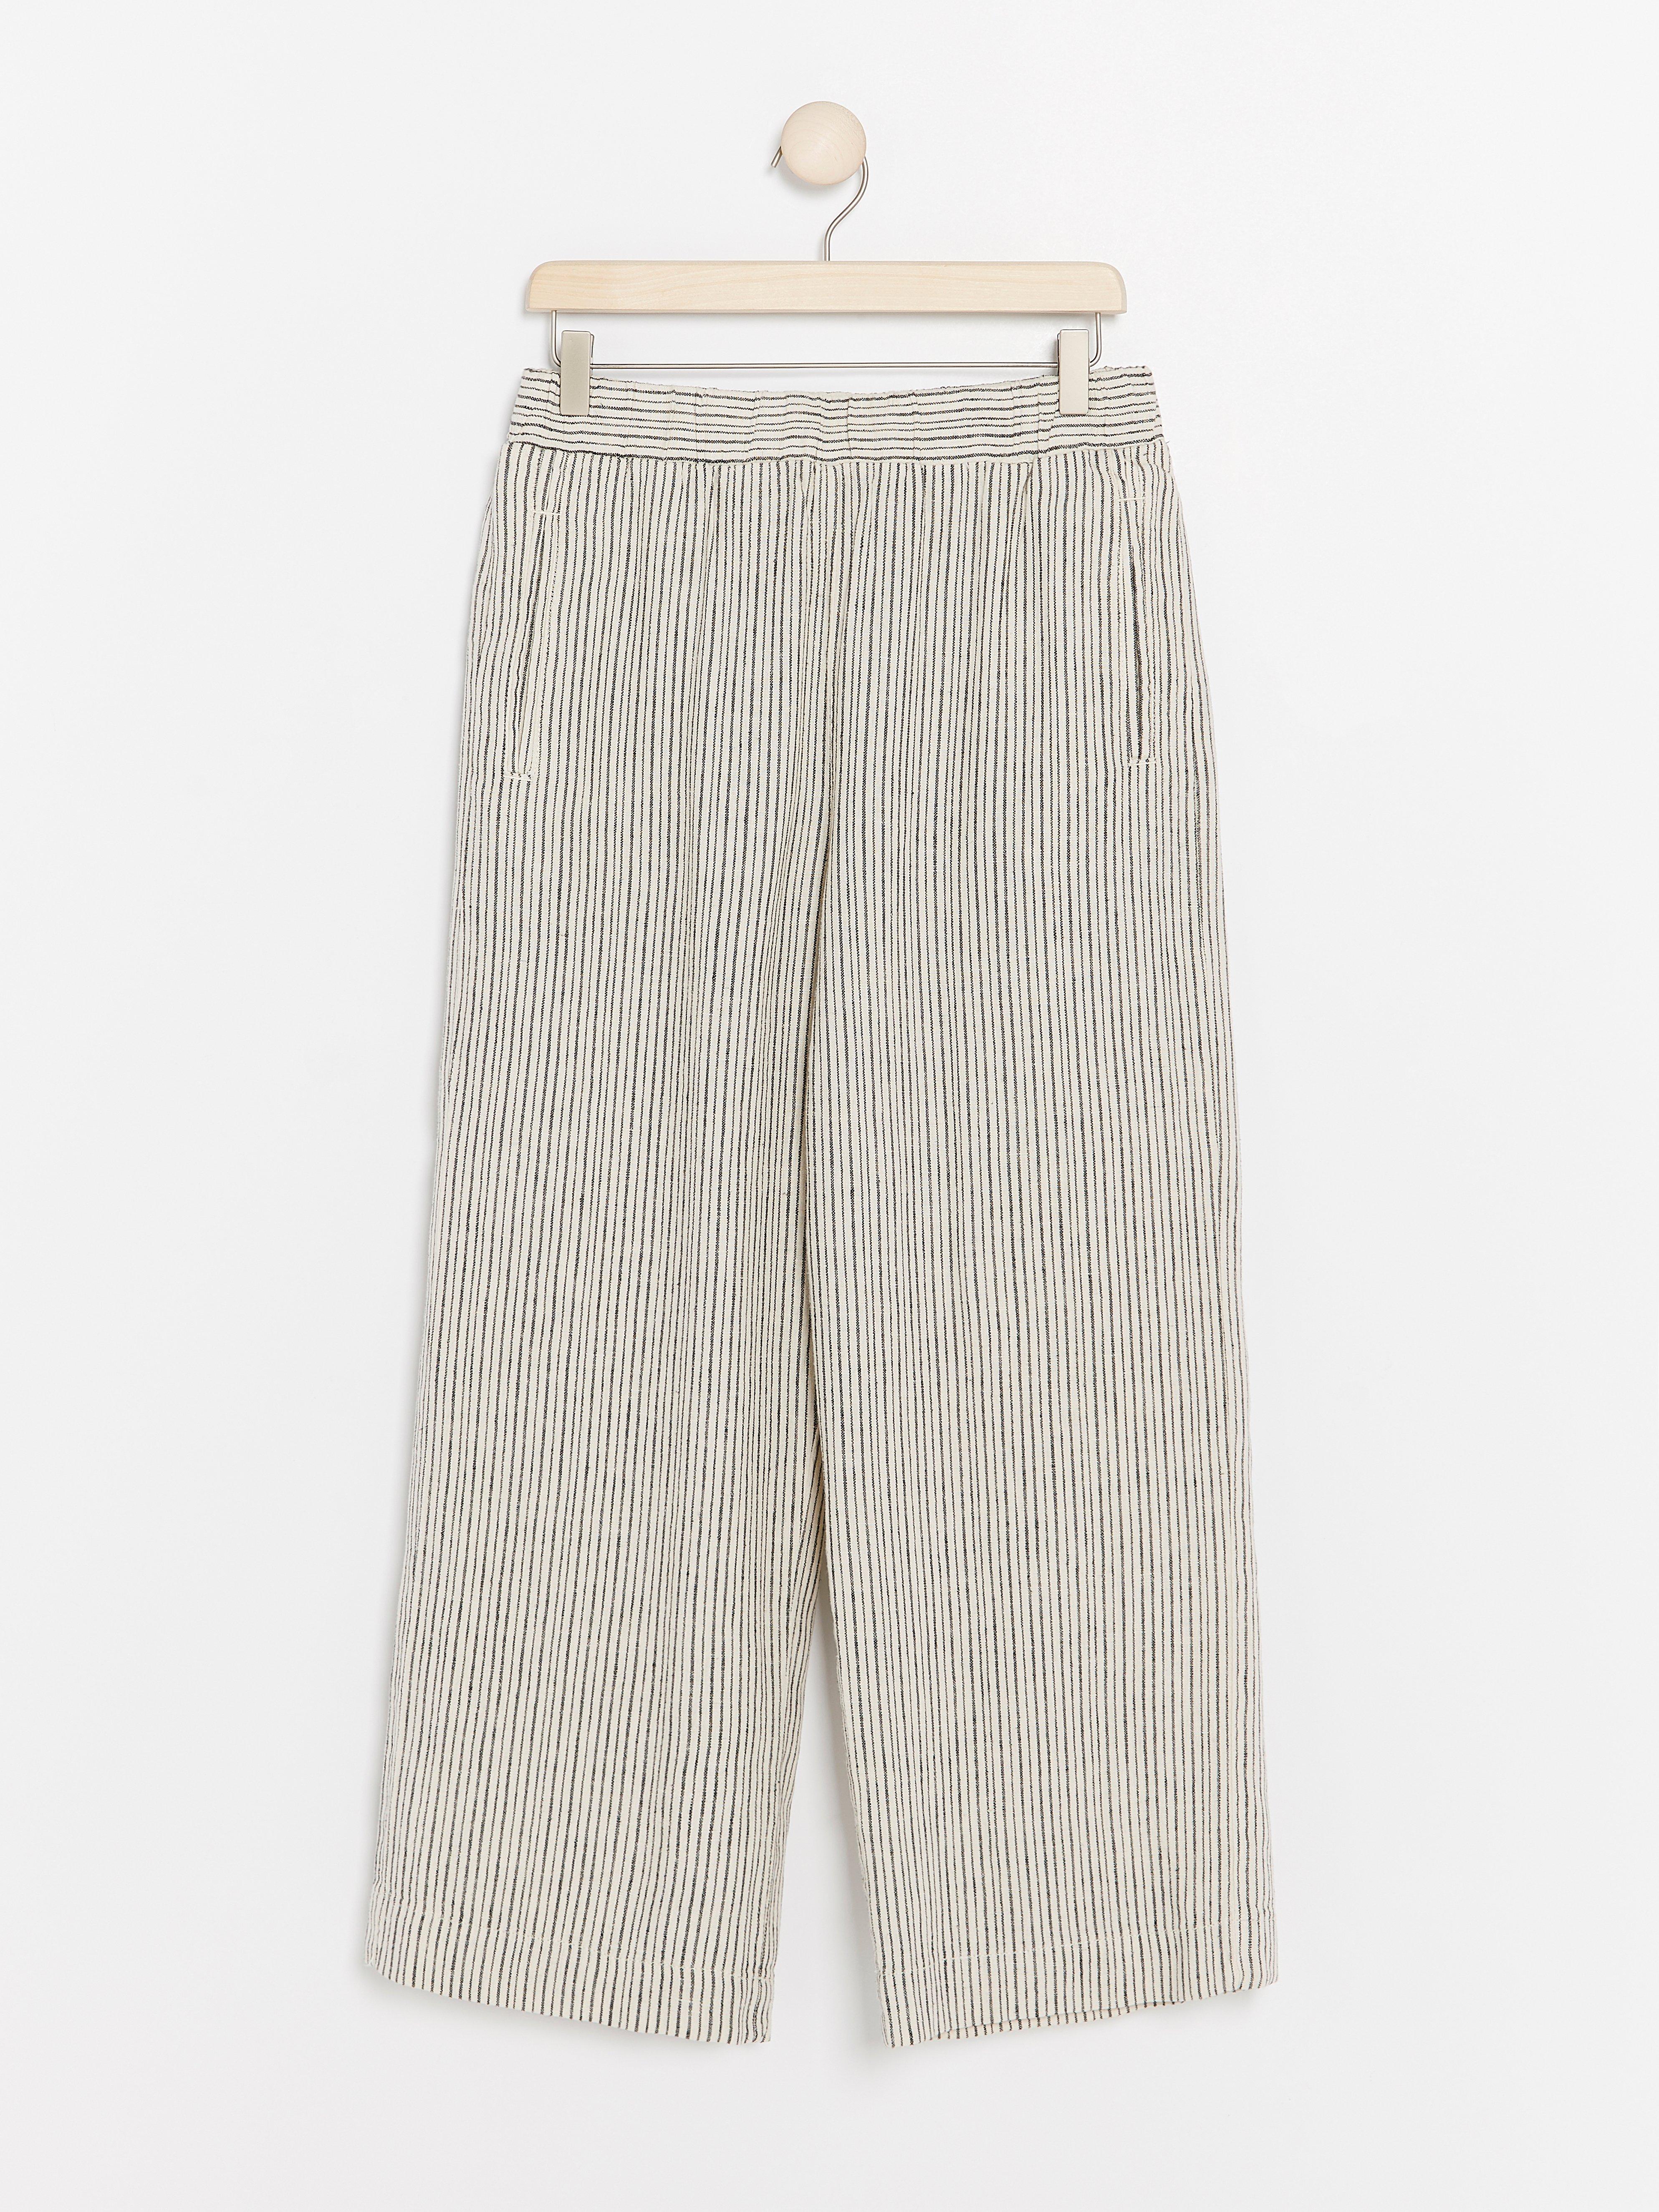 BELLA Relaxed Trousers | Lindex Europe